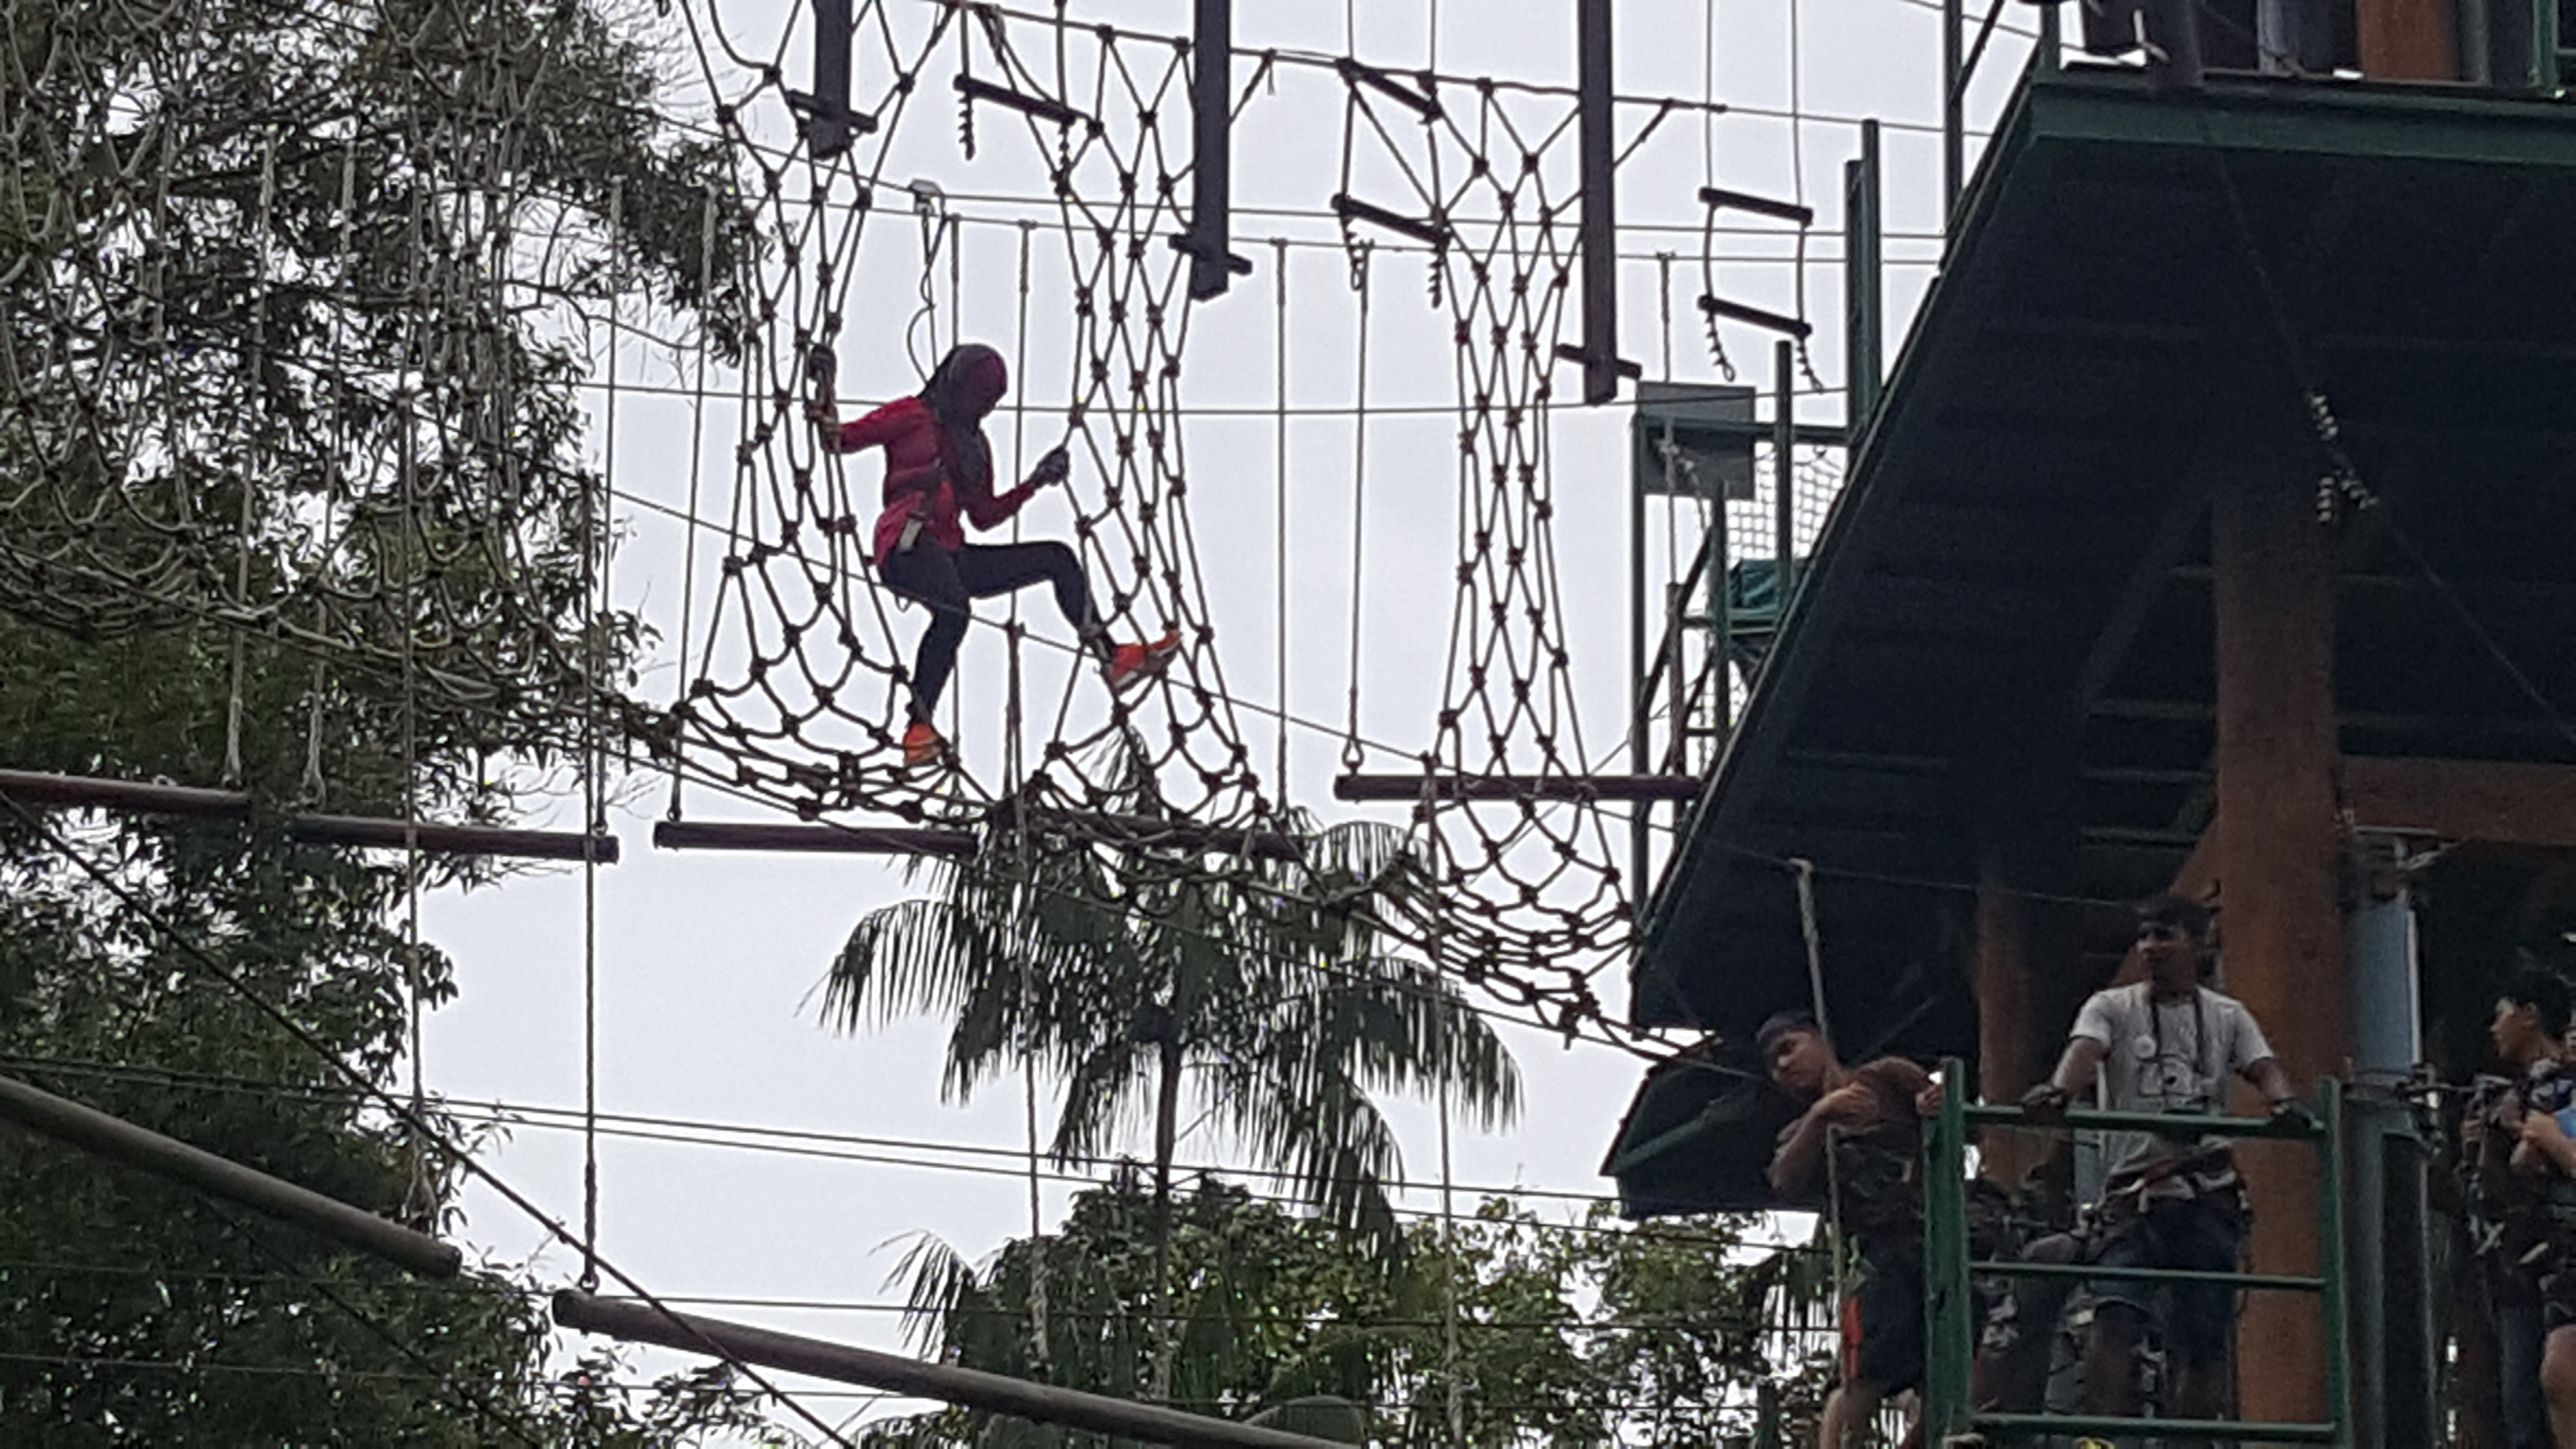 Monkey Business at Level 3 in a full body safety harness